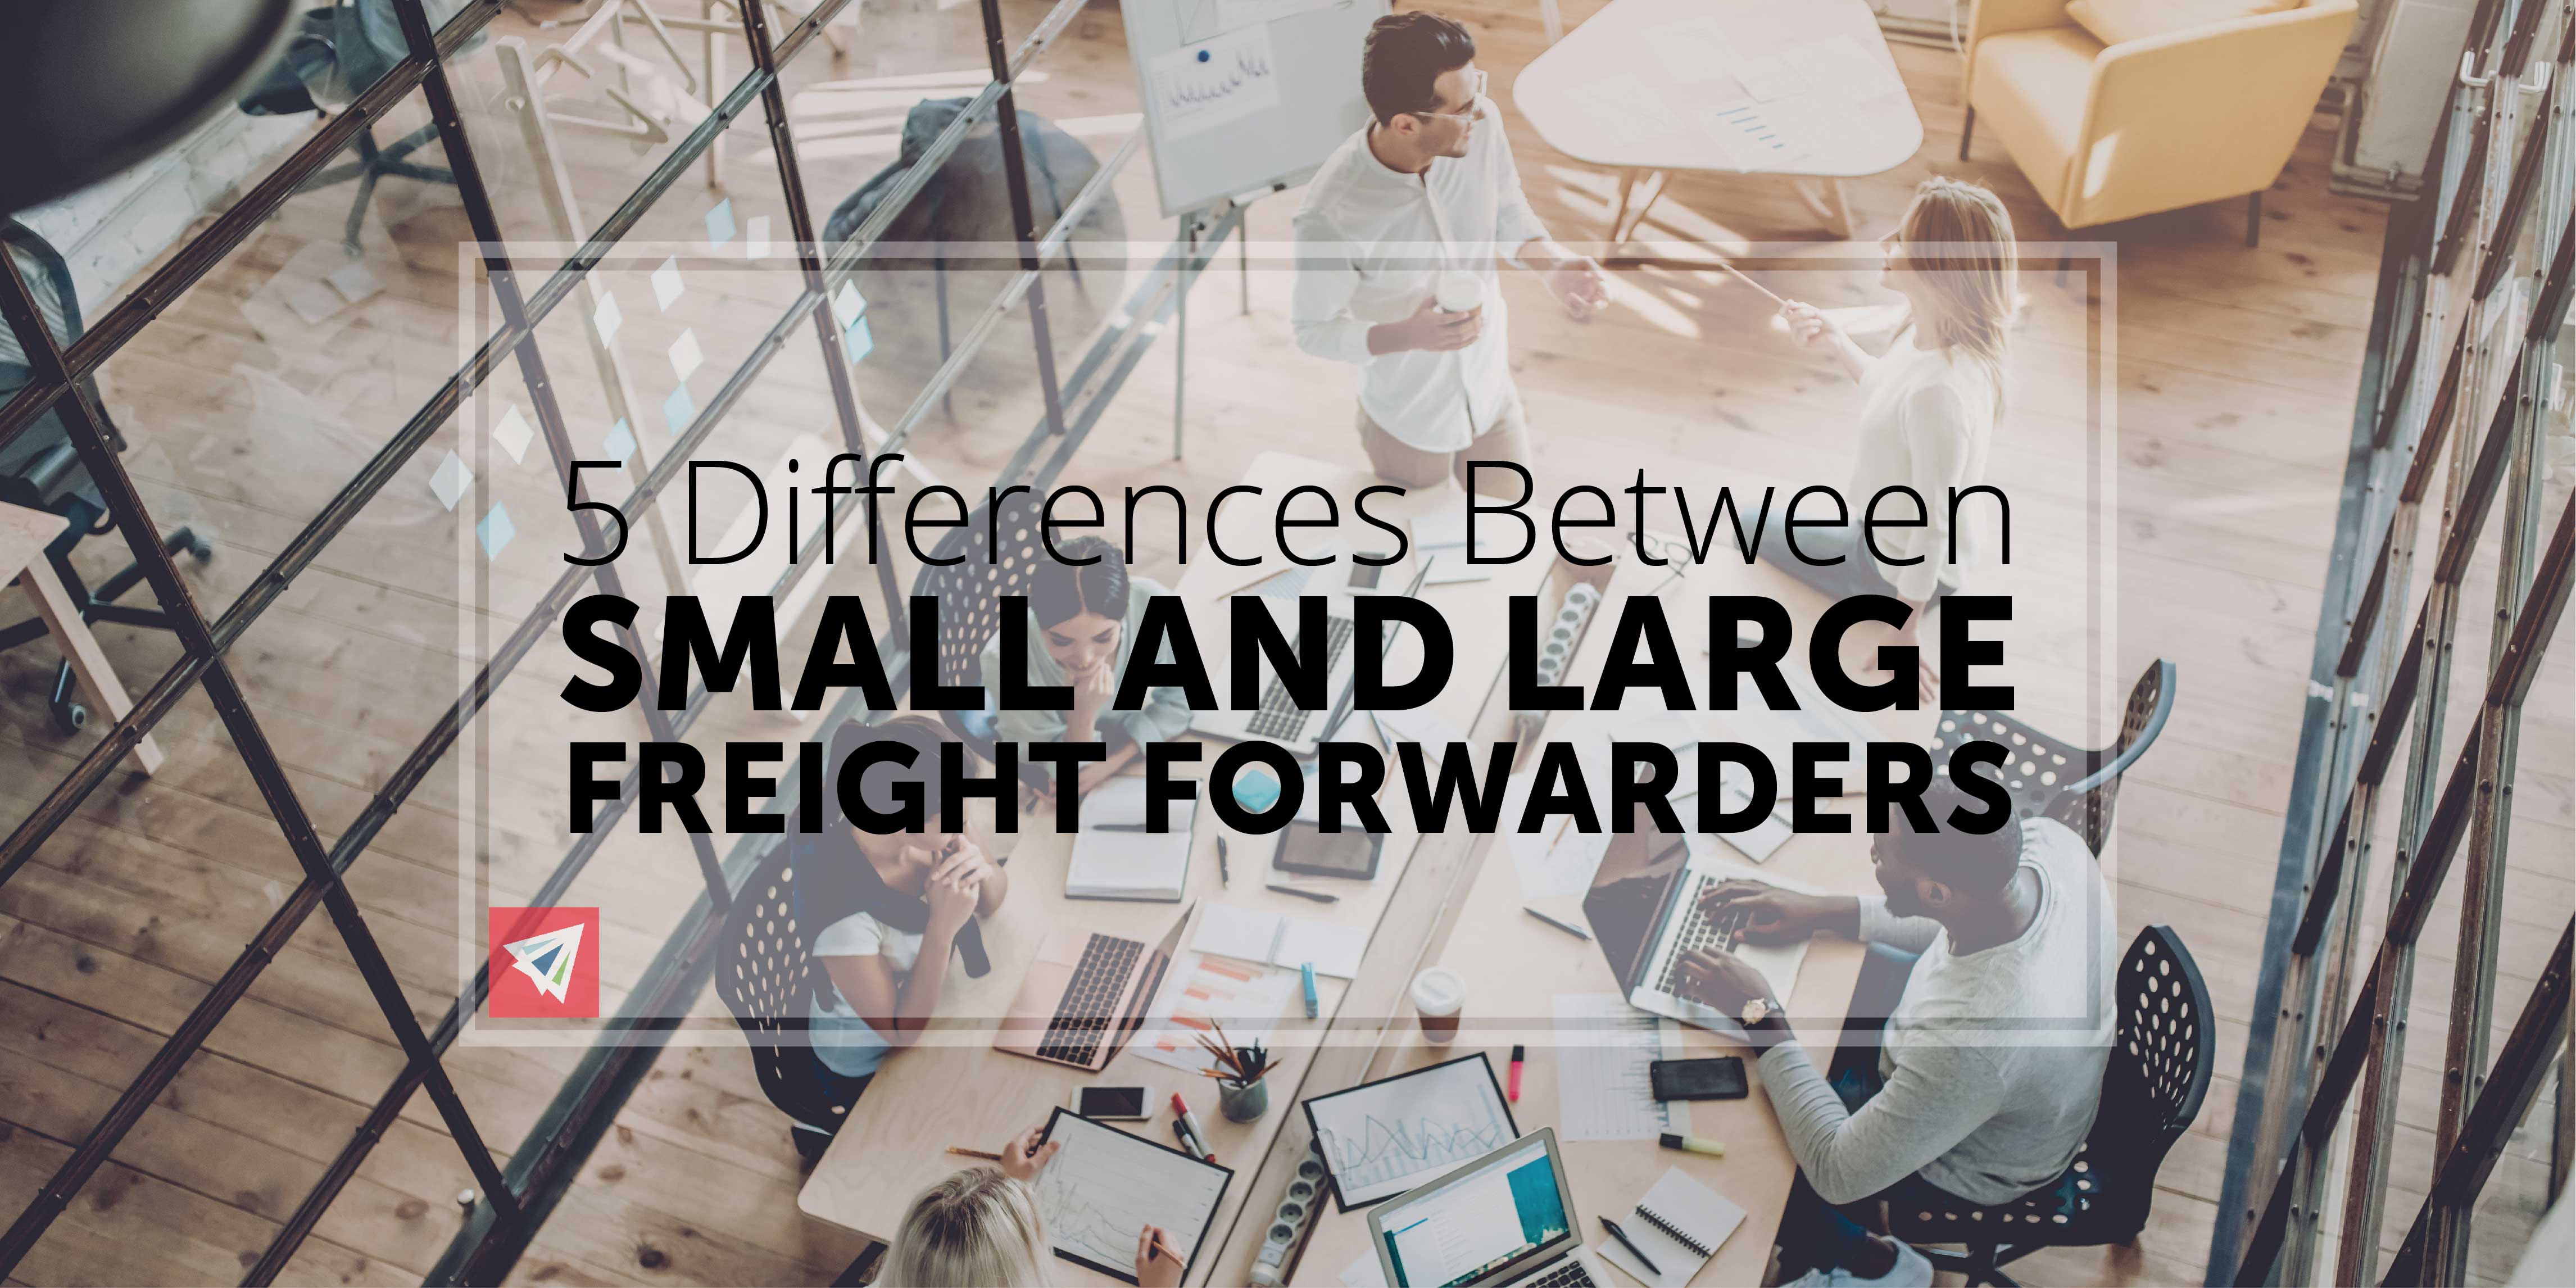 5 Differences Between Small and Large Freight Forwarders